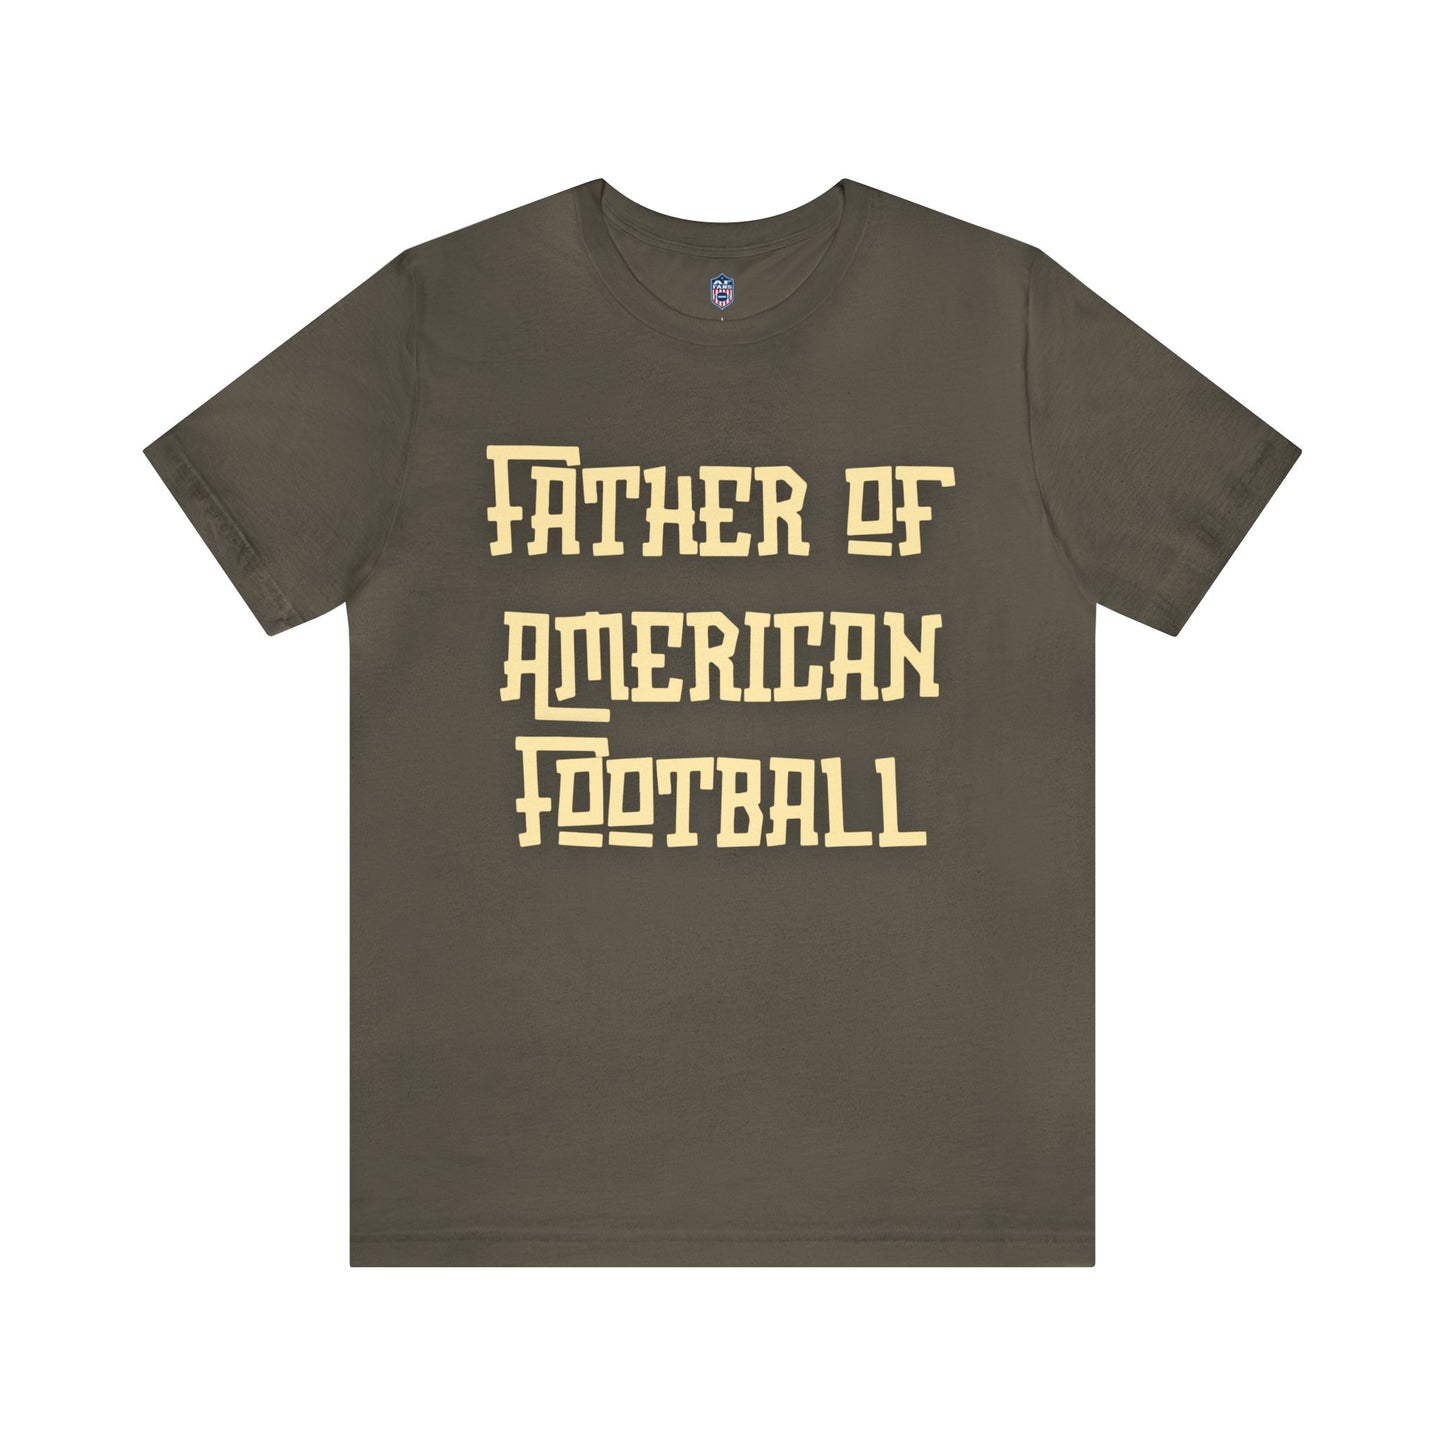 Unisex Jersey Short Sleeve Tee "Father of American Football"